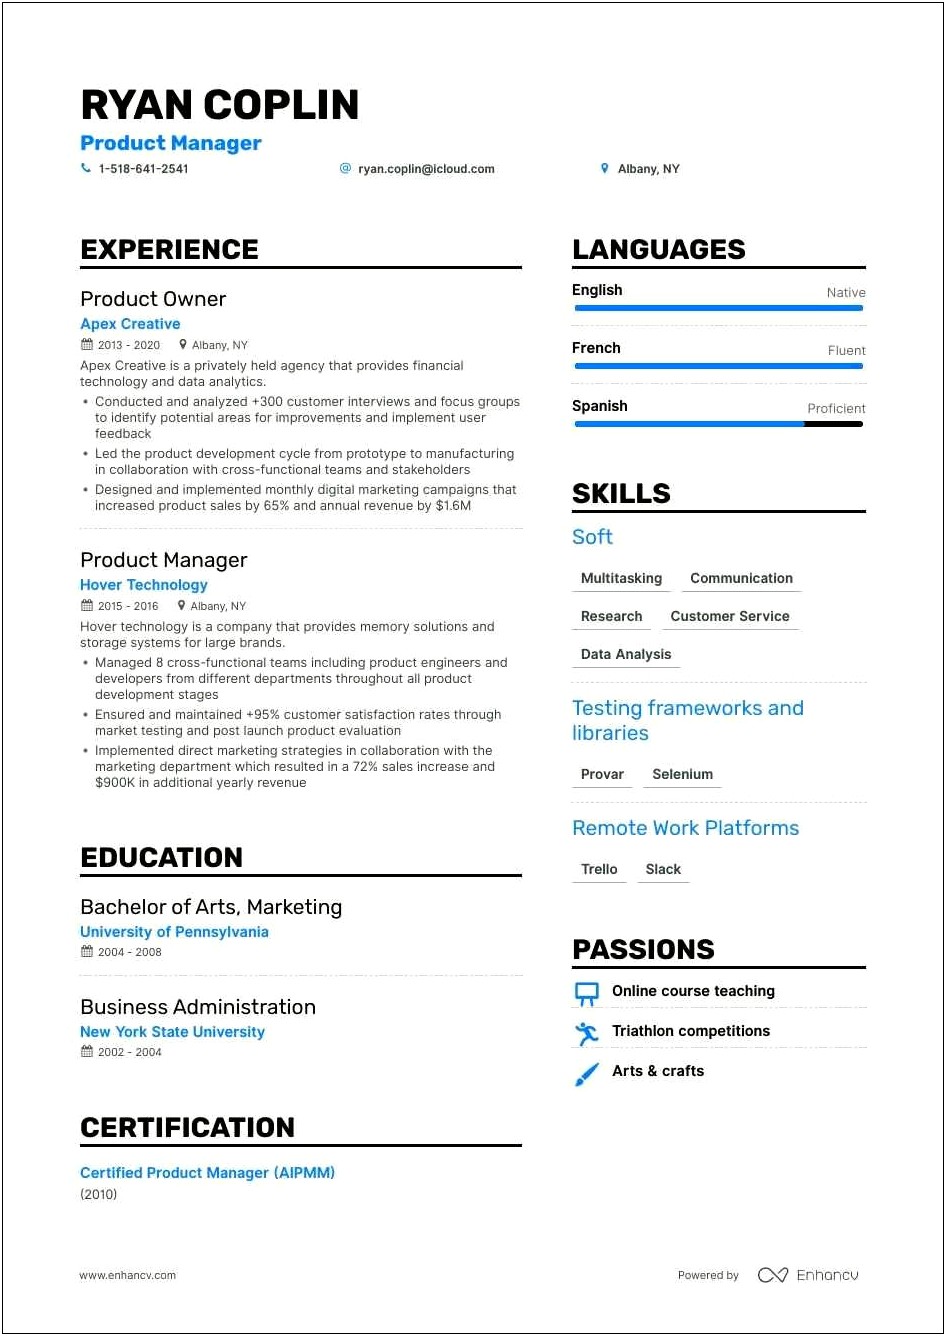 Resume For Work From Home Jobs